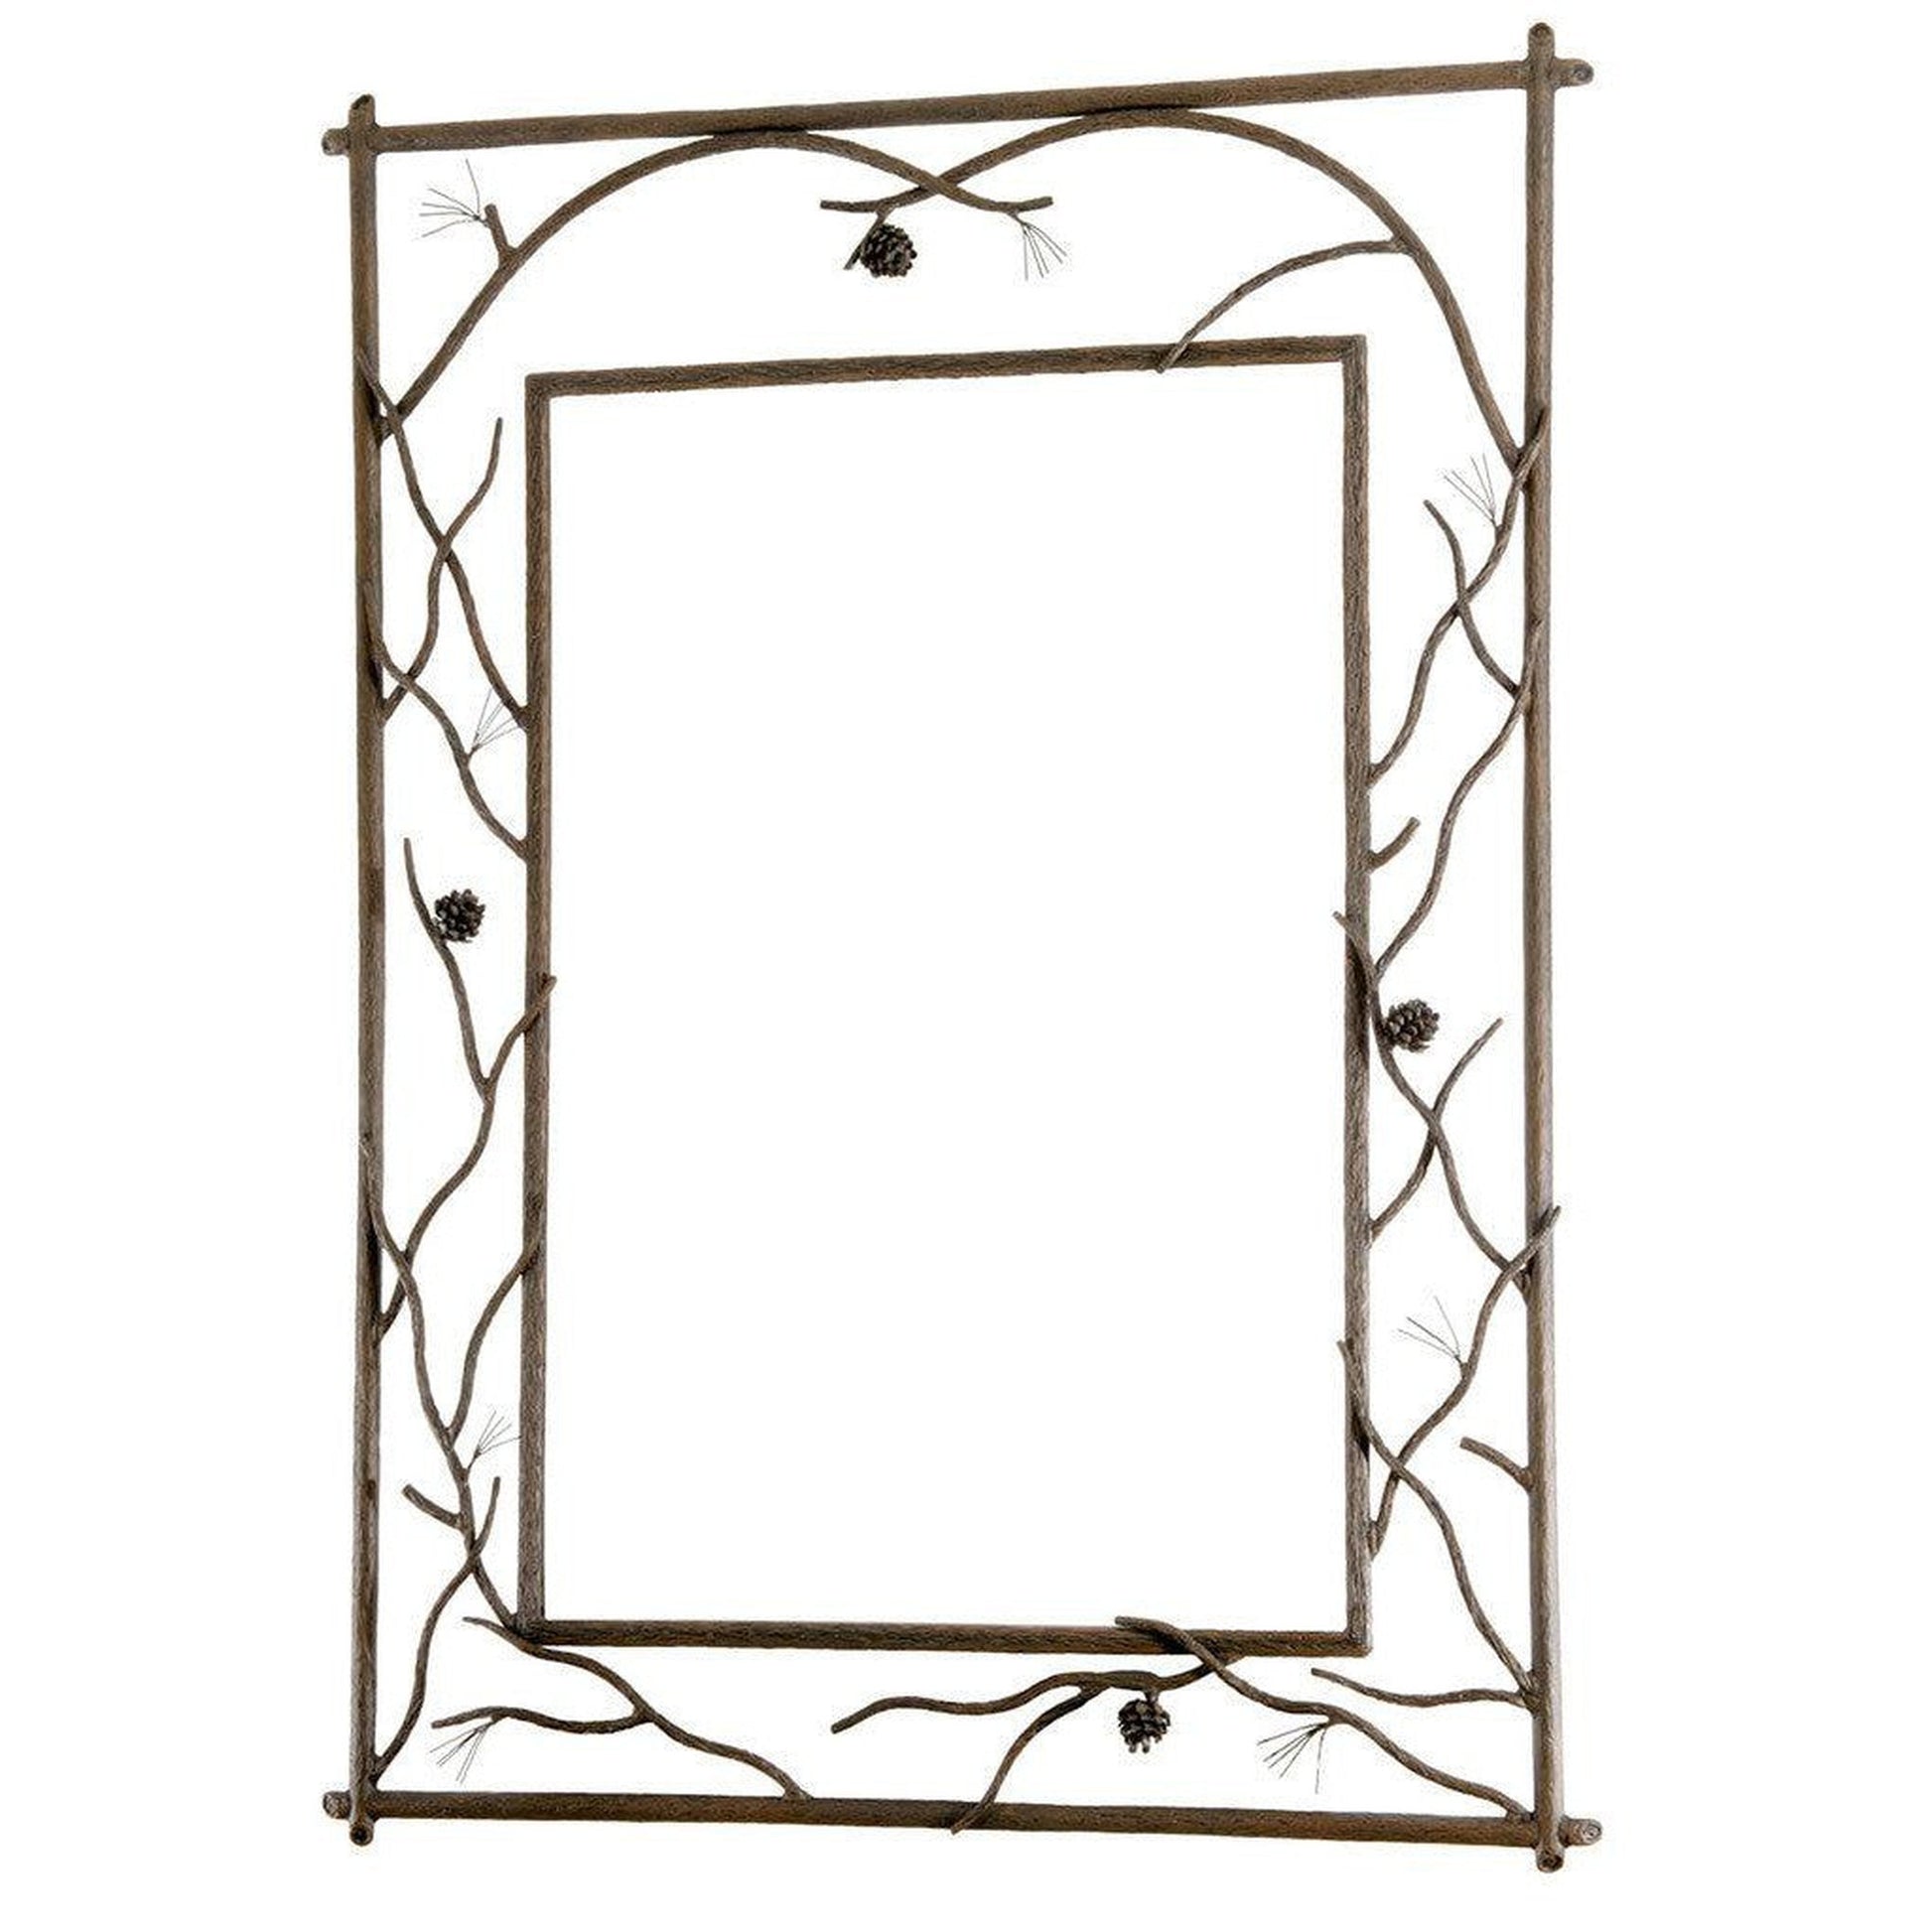 Stone County Ironworks Pine 37" x 51" Large Hand Rubbed Pewter Branched Iron Wall Mirror With Gold Iron Accent